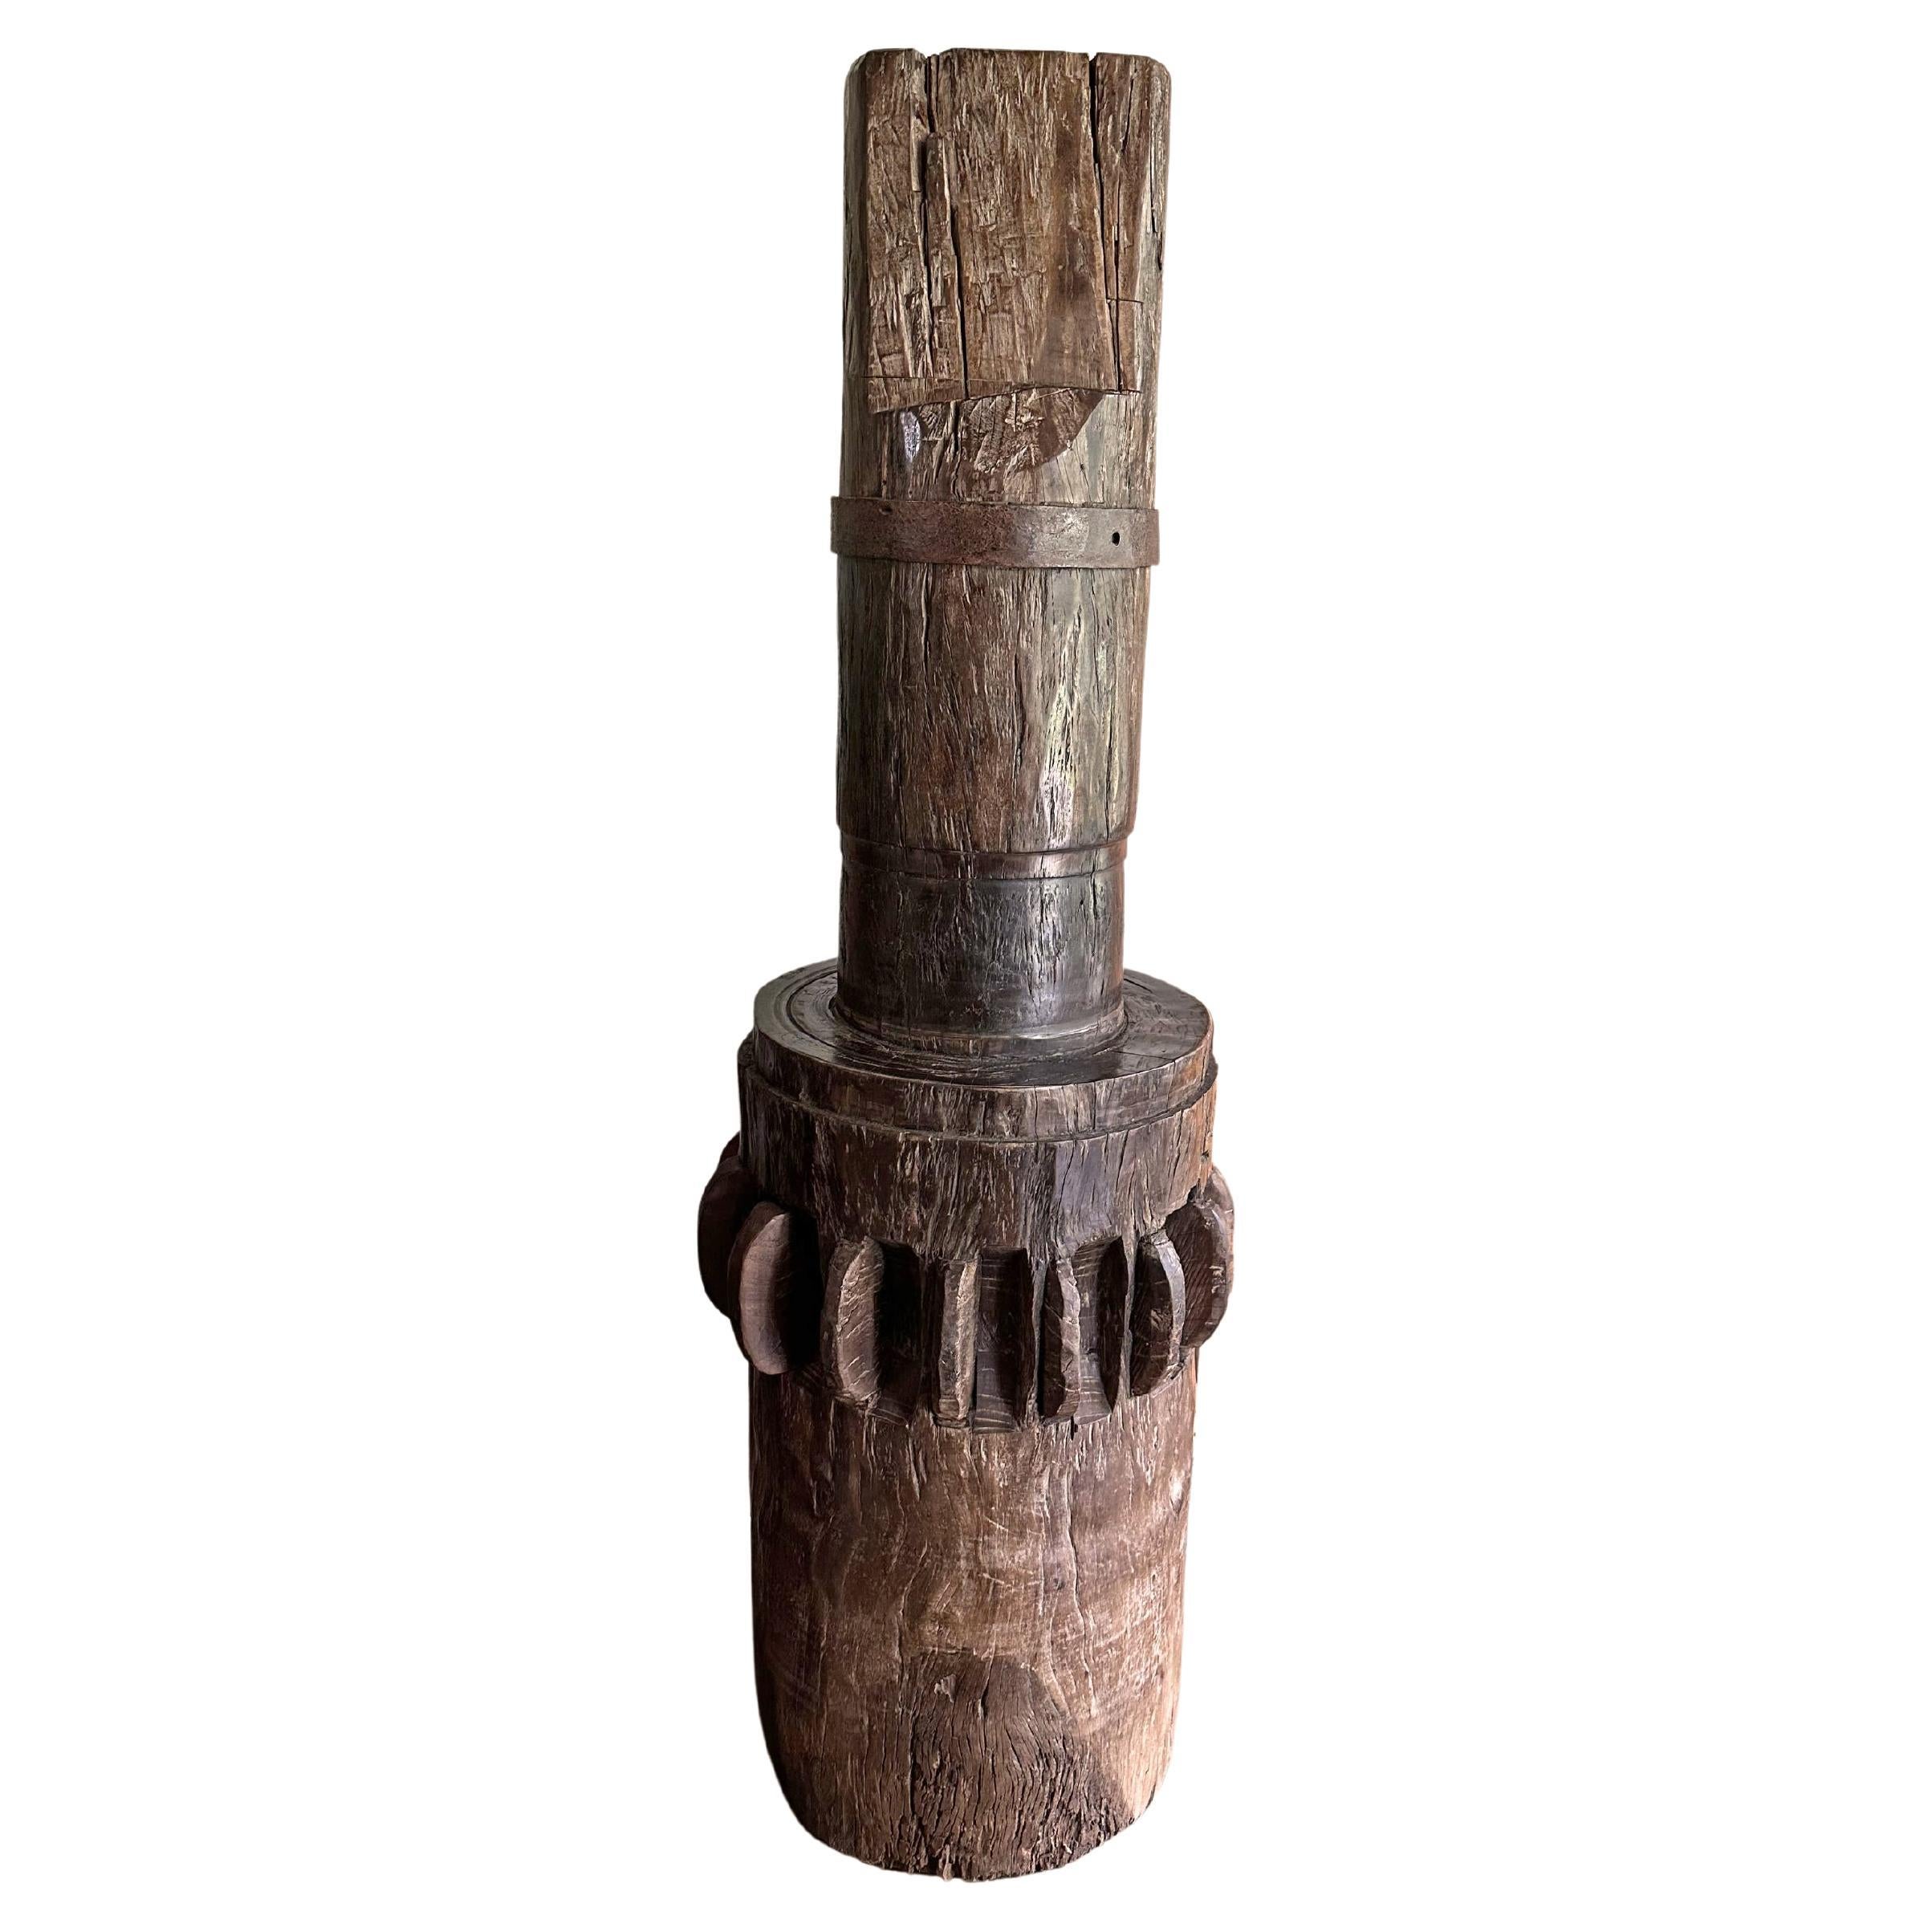 Solid Teak Sugar Cane Mill Crusher / Grinder from Java, Indonesia, c. 1900